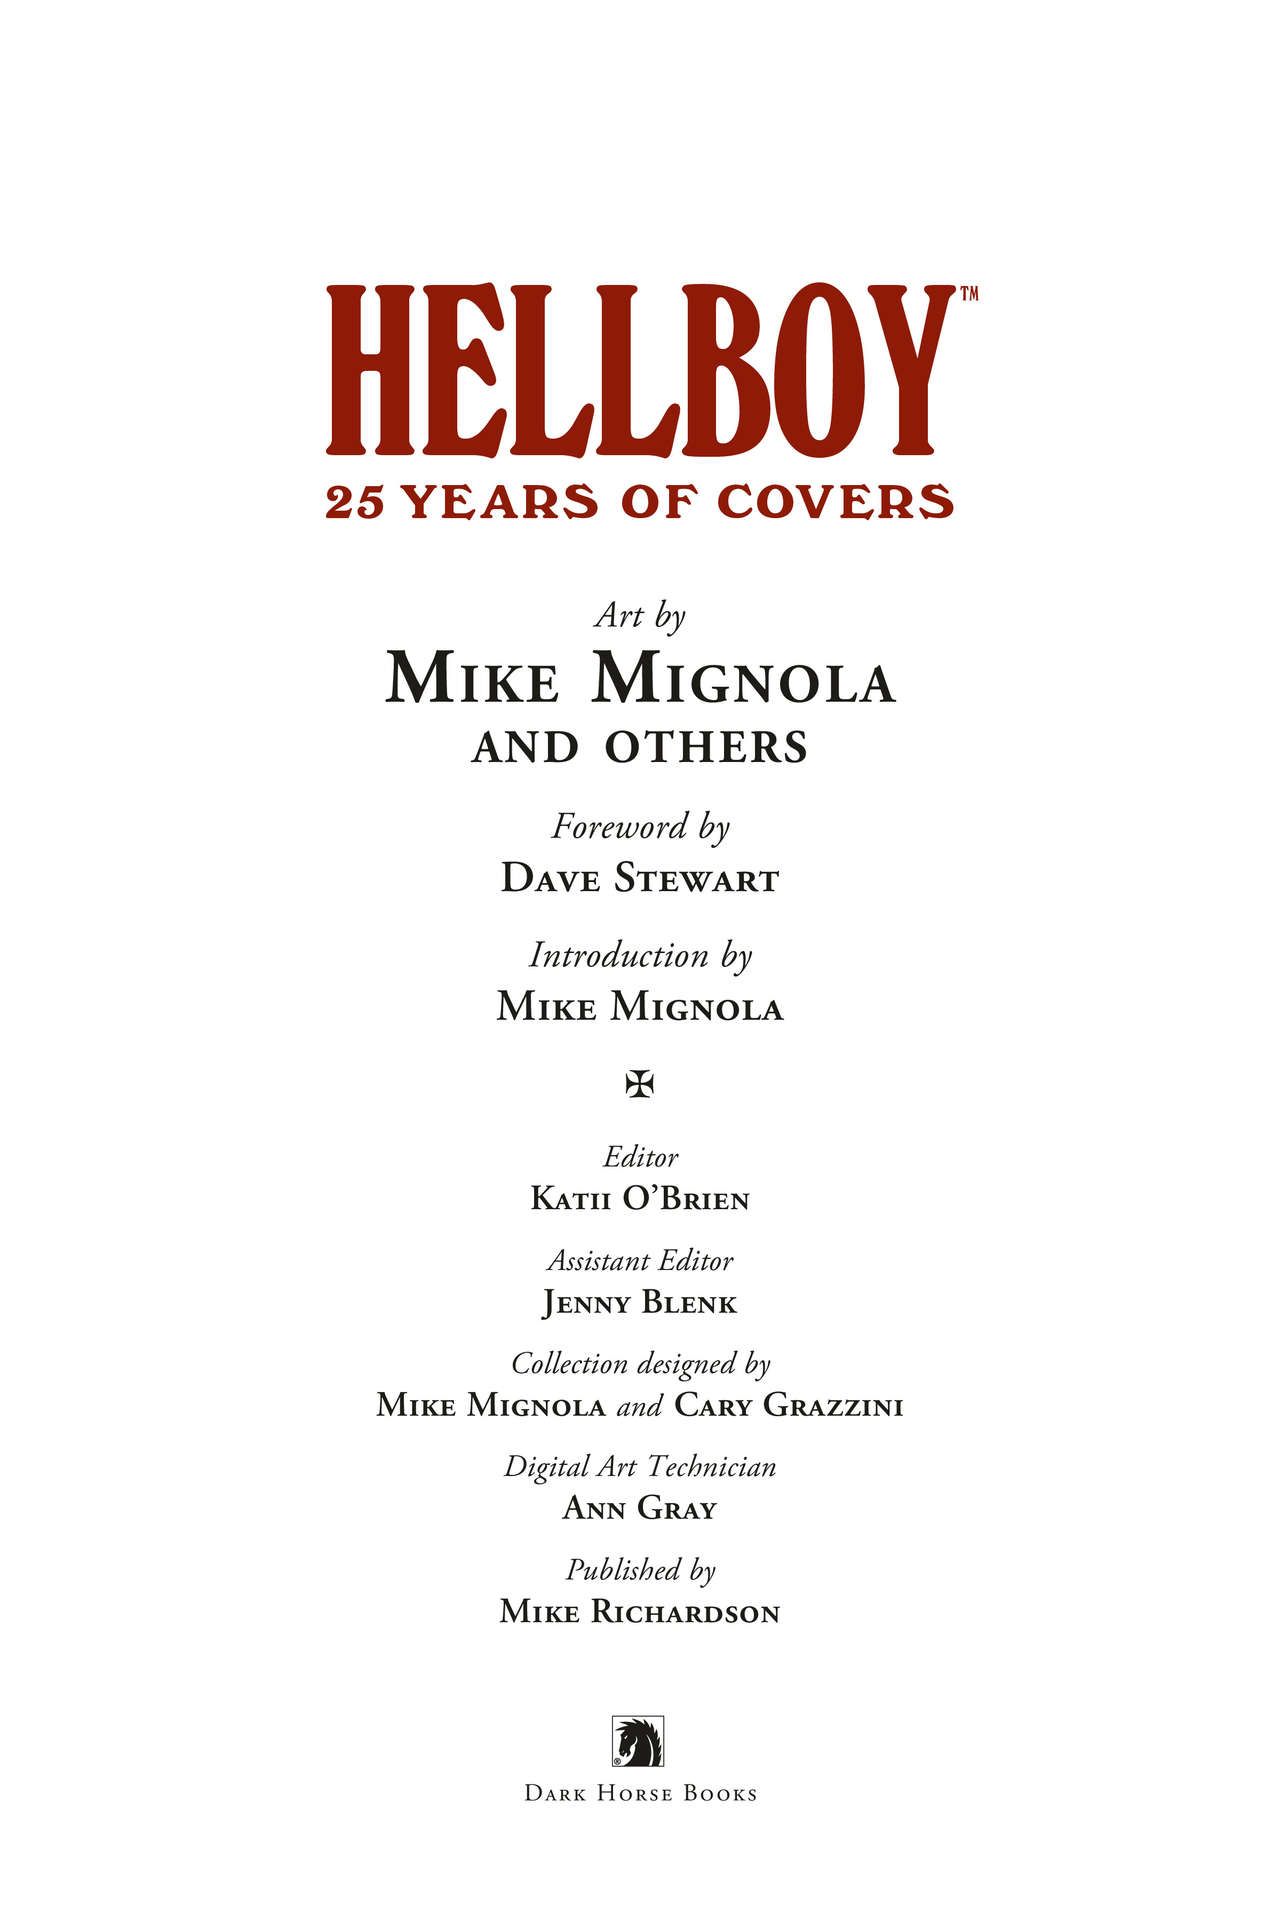 [Mike Mignola] Hellboy - 25 Years of Covers (2019) 5